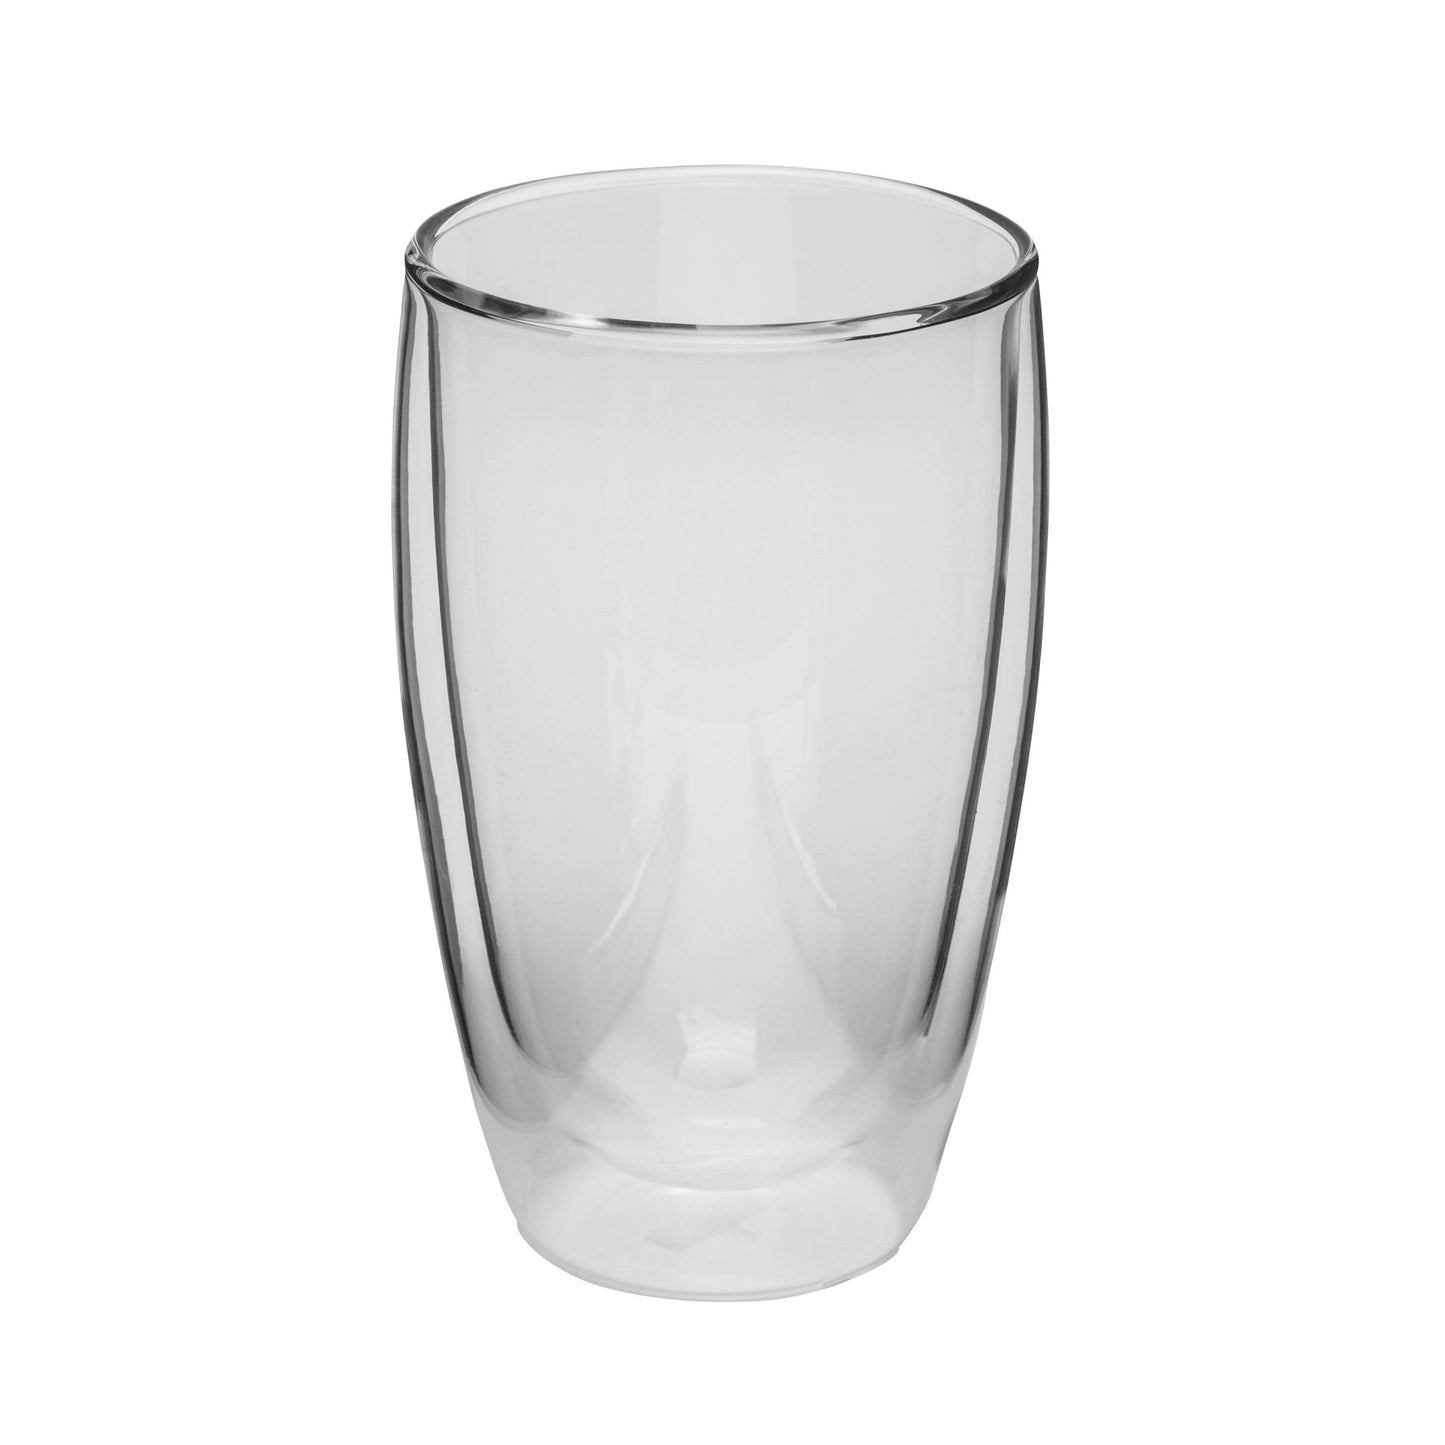 Heat Resistant Glass - Nordic Side - bis-hidden, dining, mugs and glasses